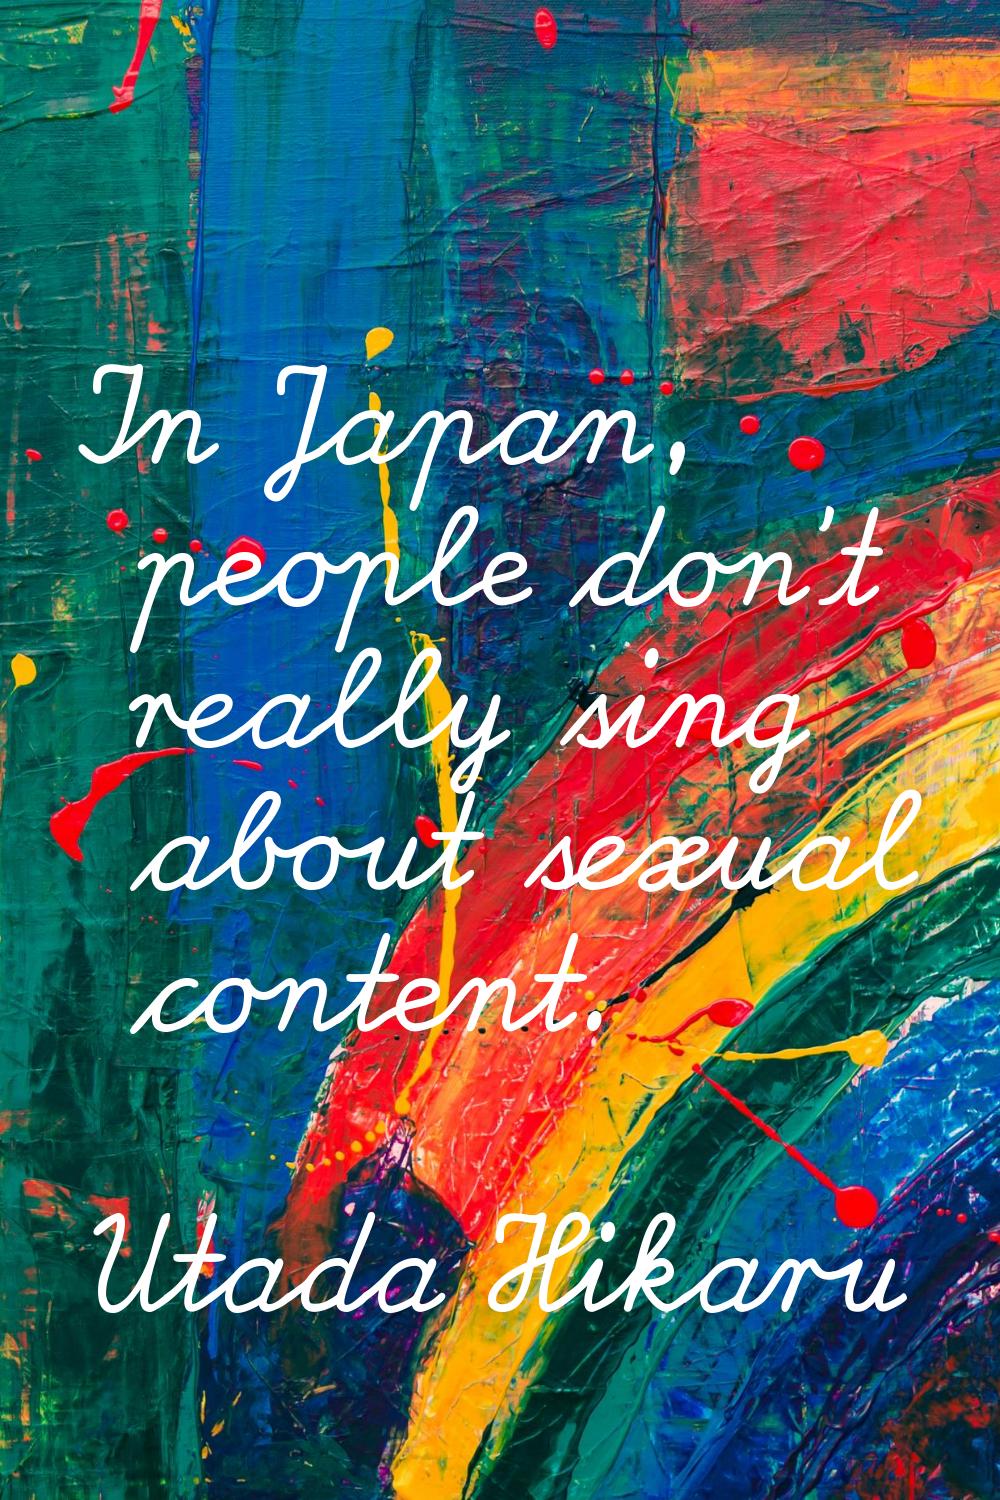 In Japan, people don't really sing about sexual content.